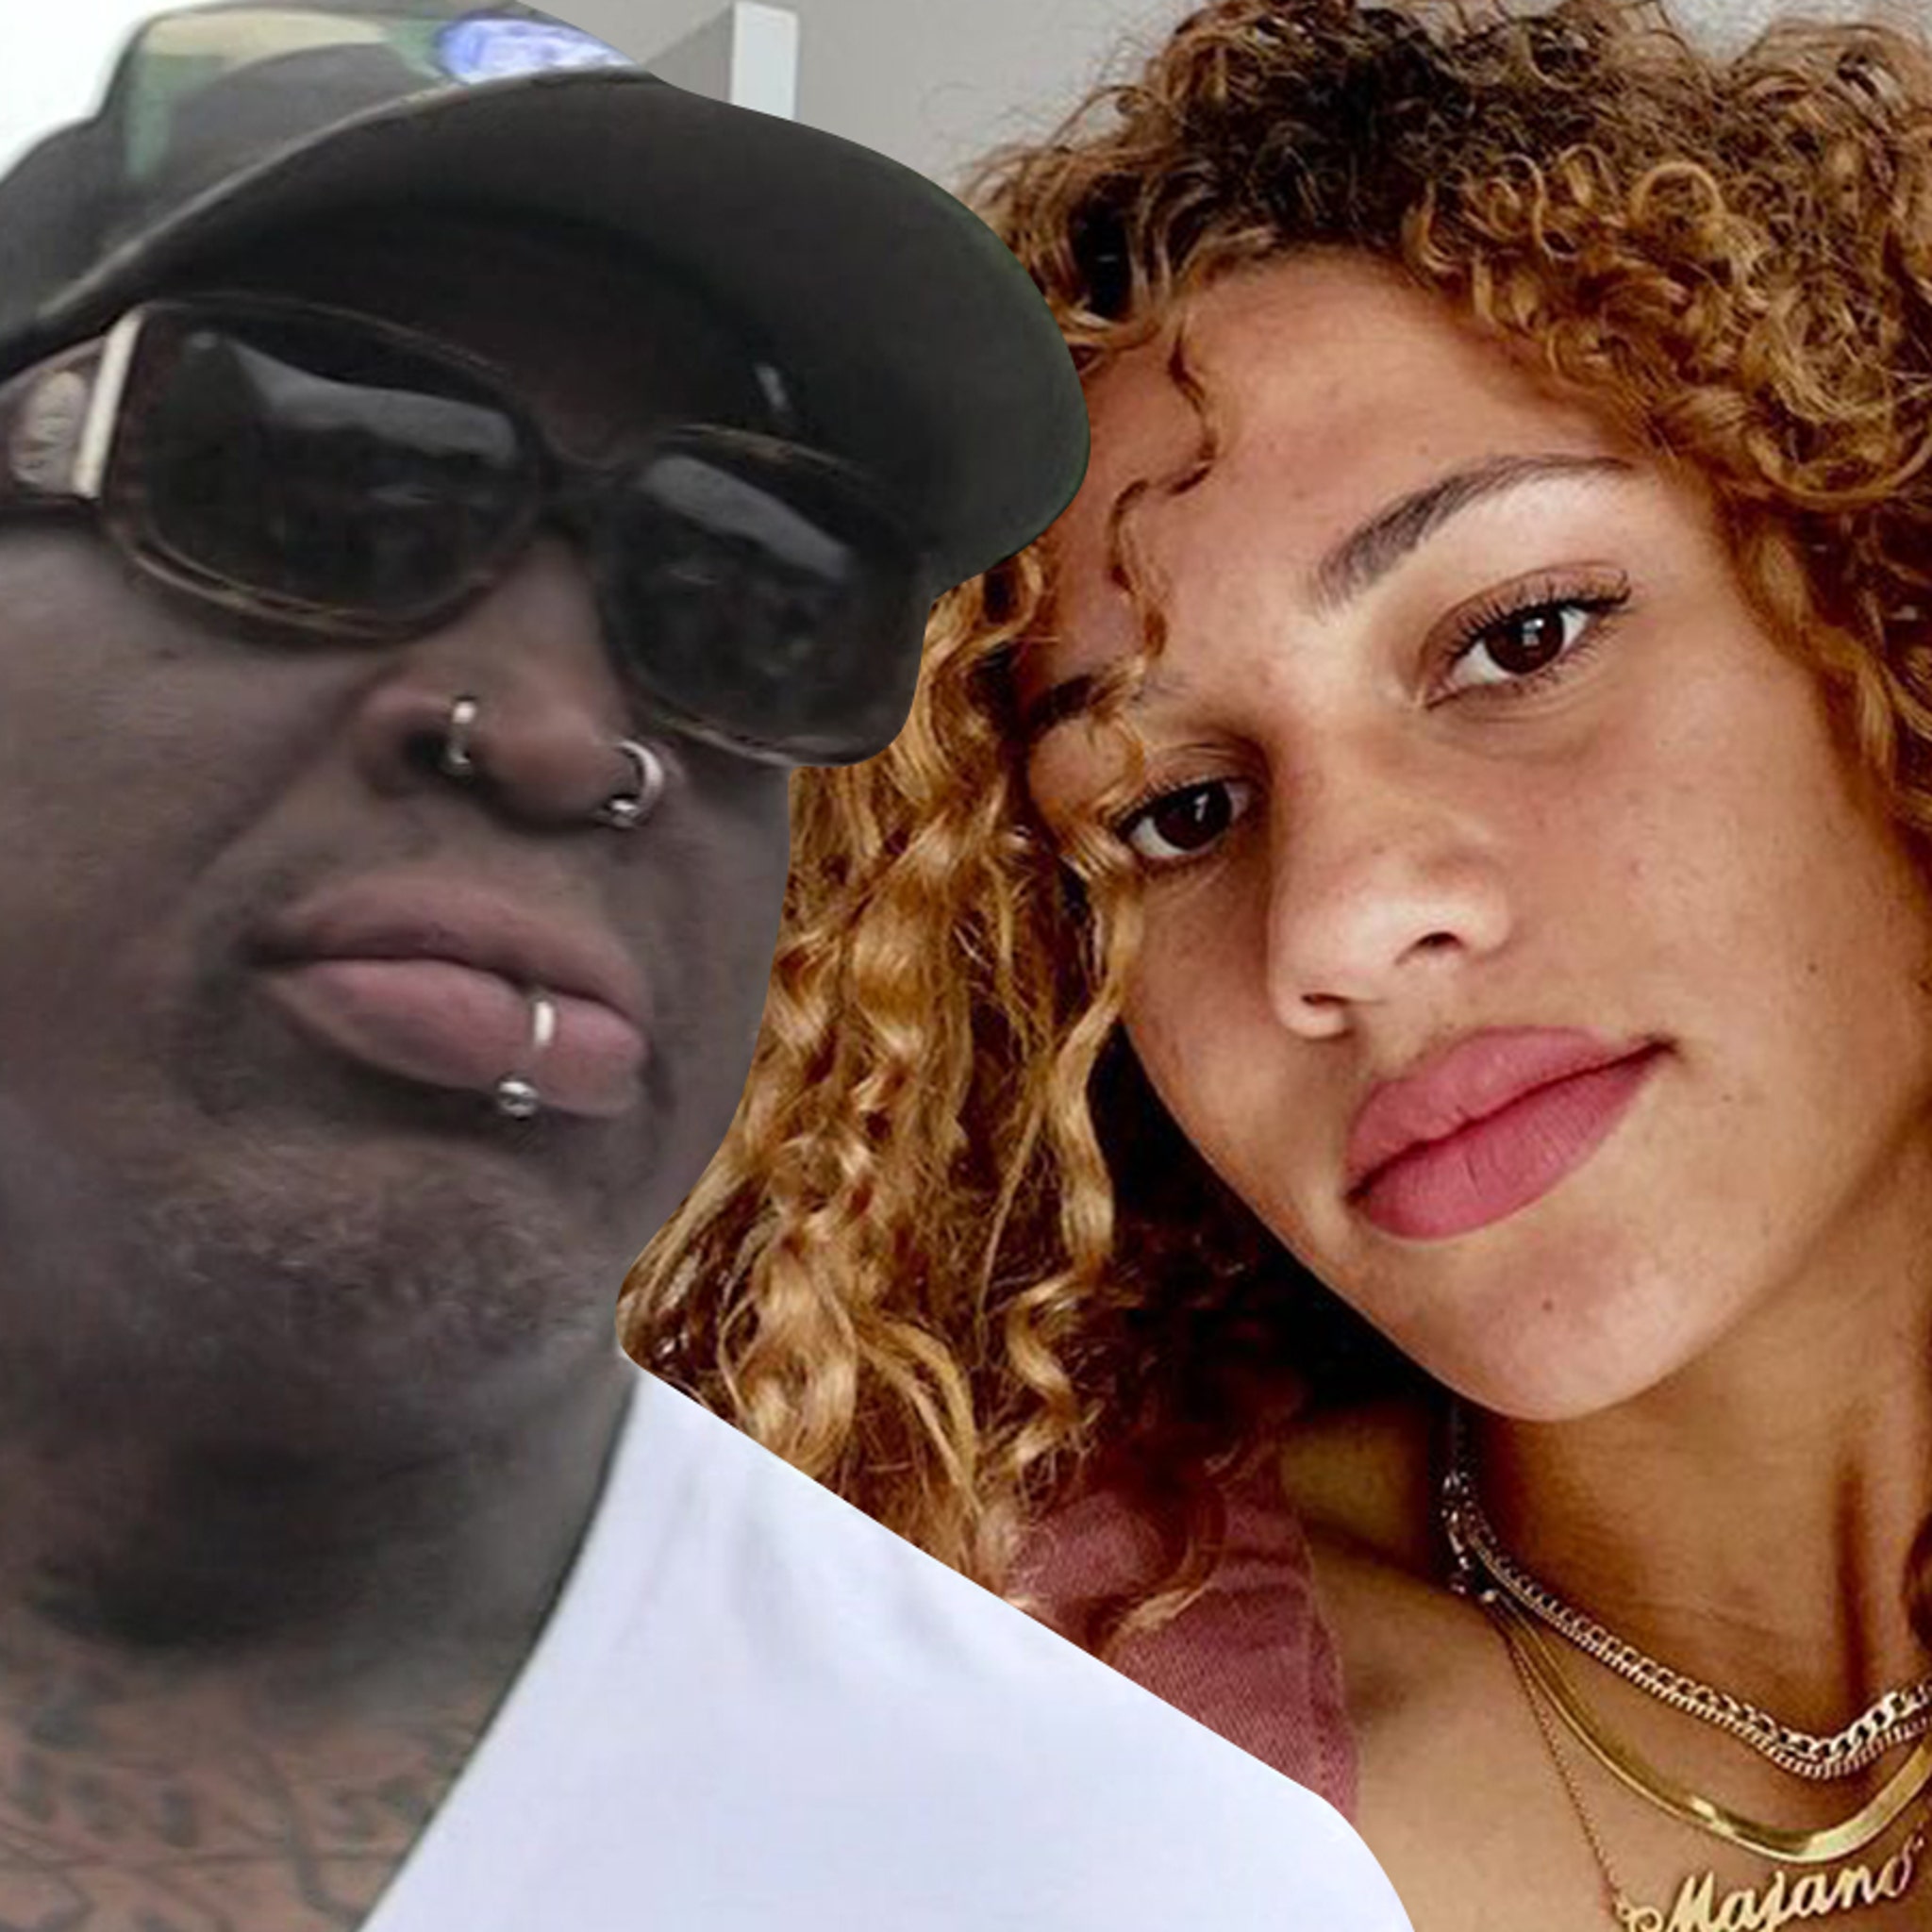 Does Dennis Rodman Have Kids? Today He's a More Involved Dad